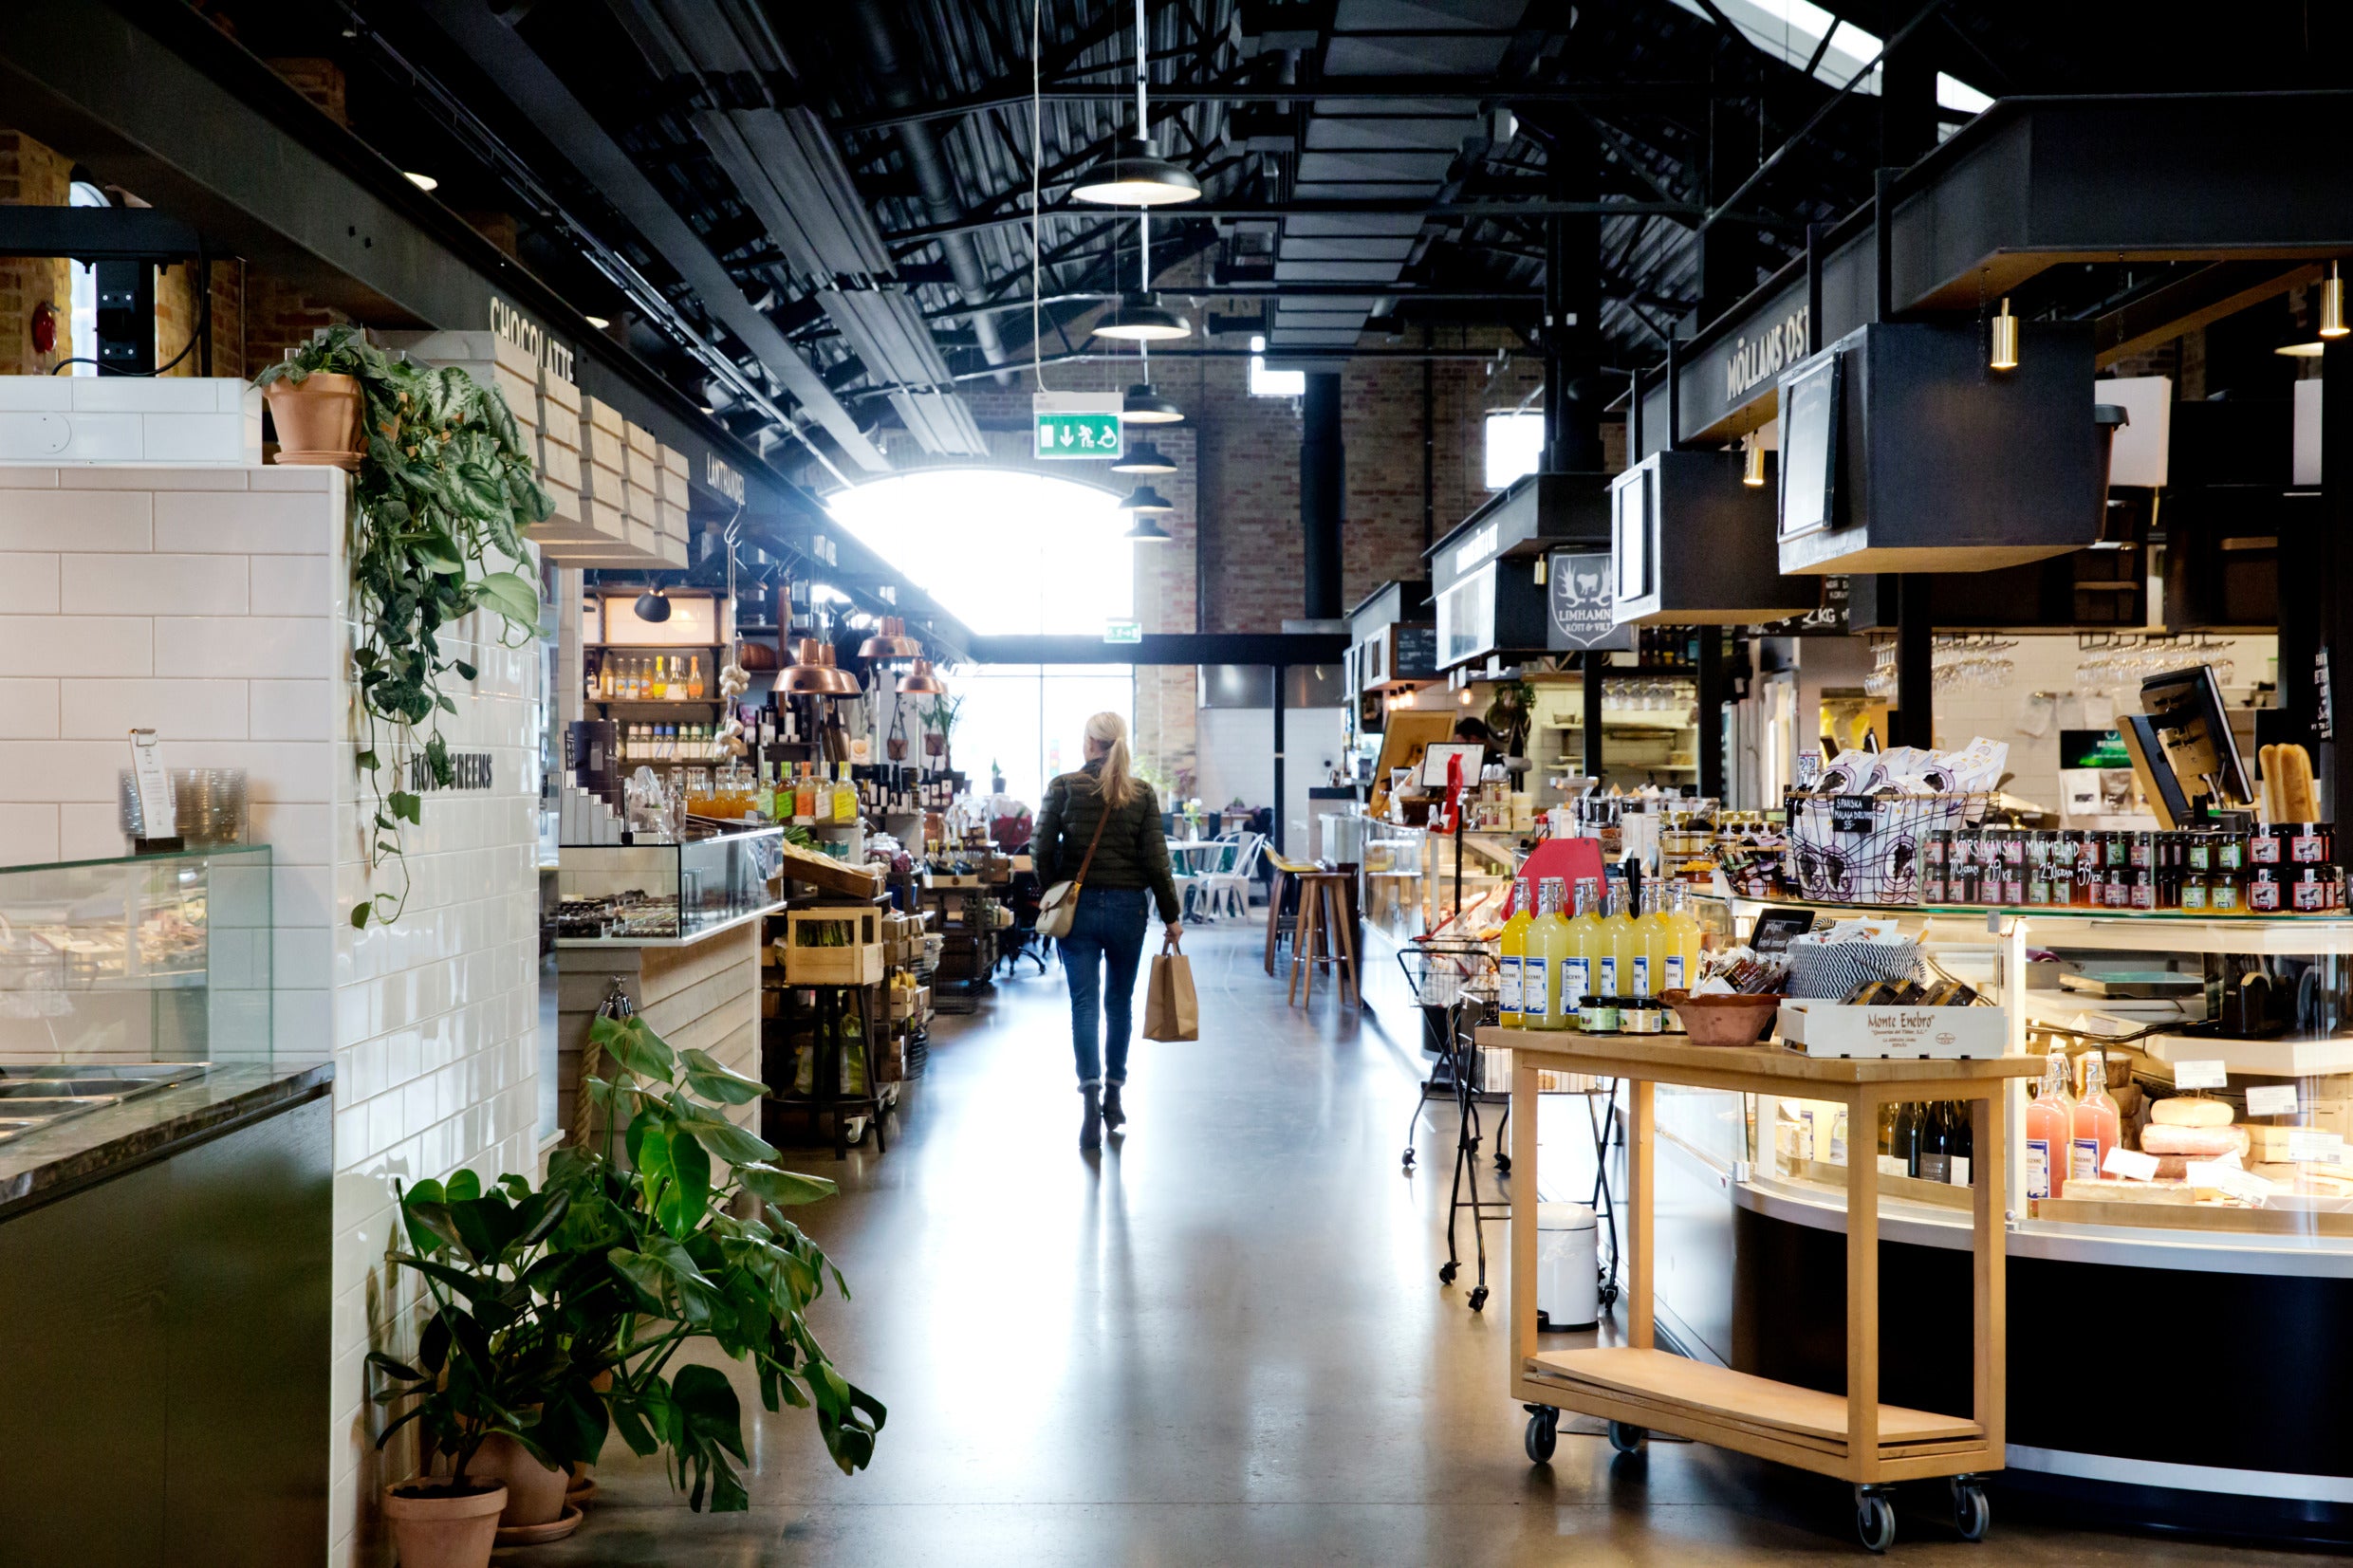 The Saluhall food market is a stylish place to shop and snack